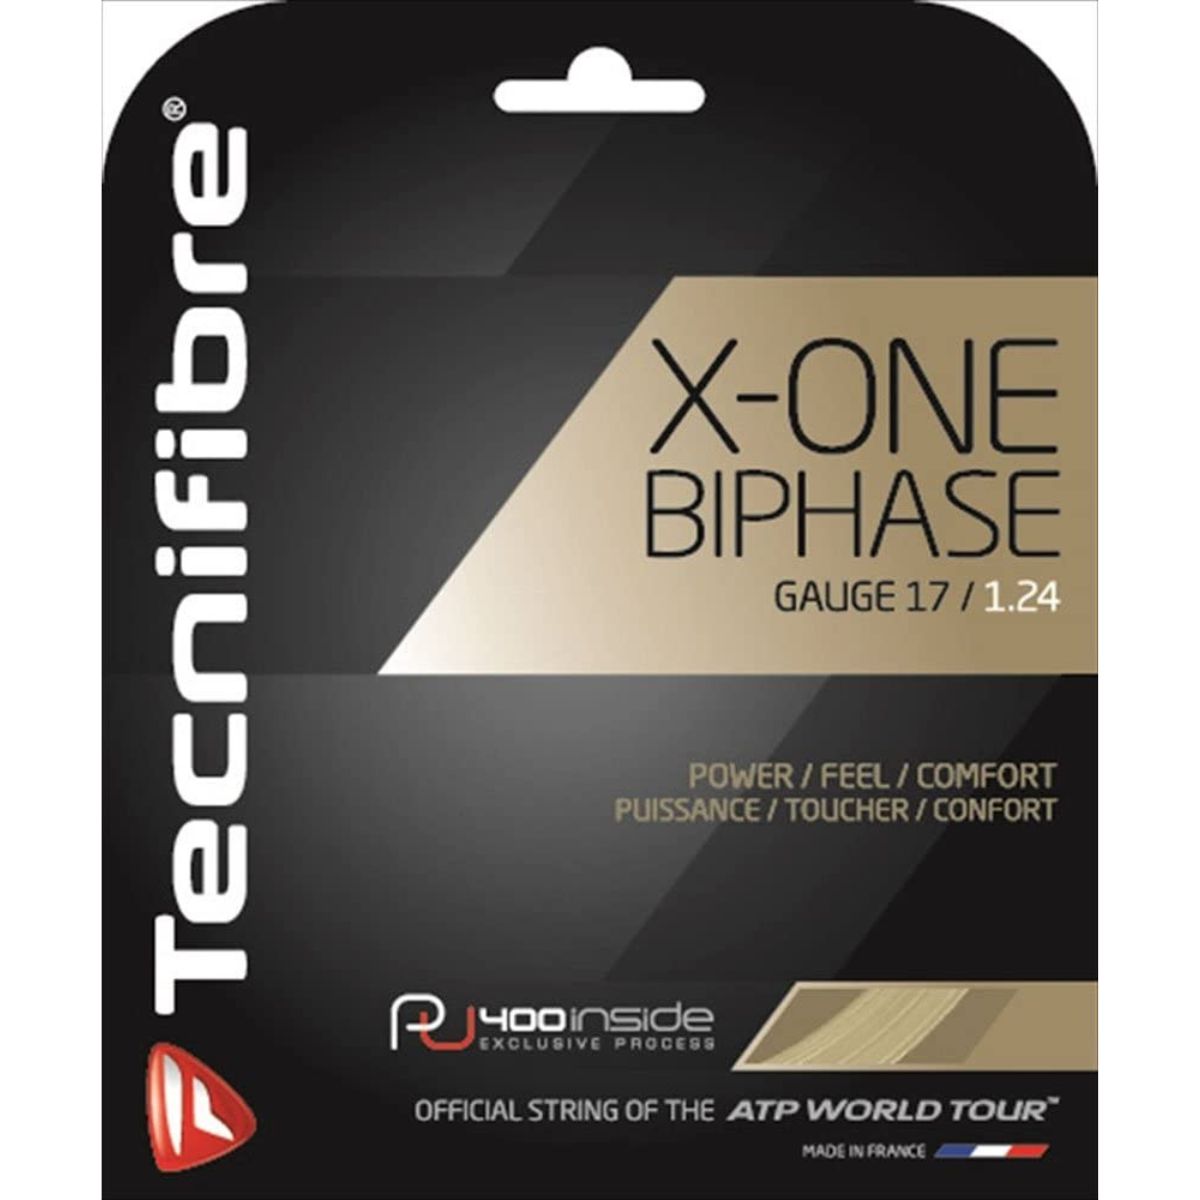 The Best Tennis Strings Options: Tecnifibre X-One Biphase